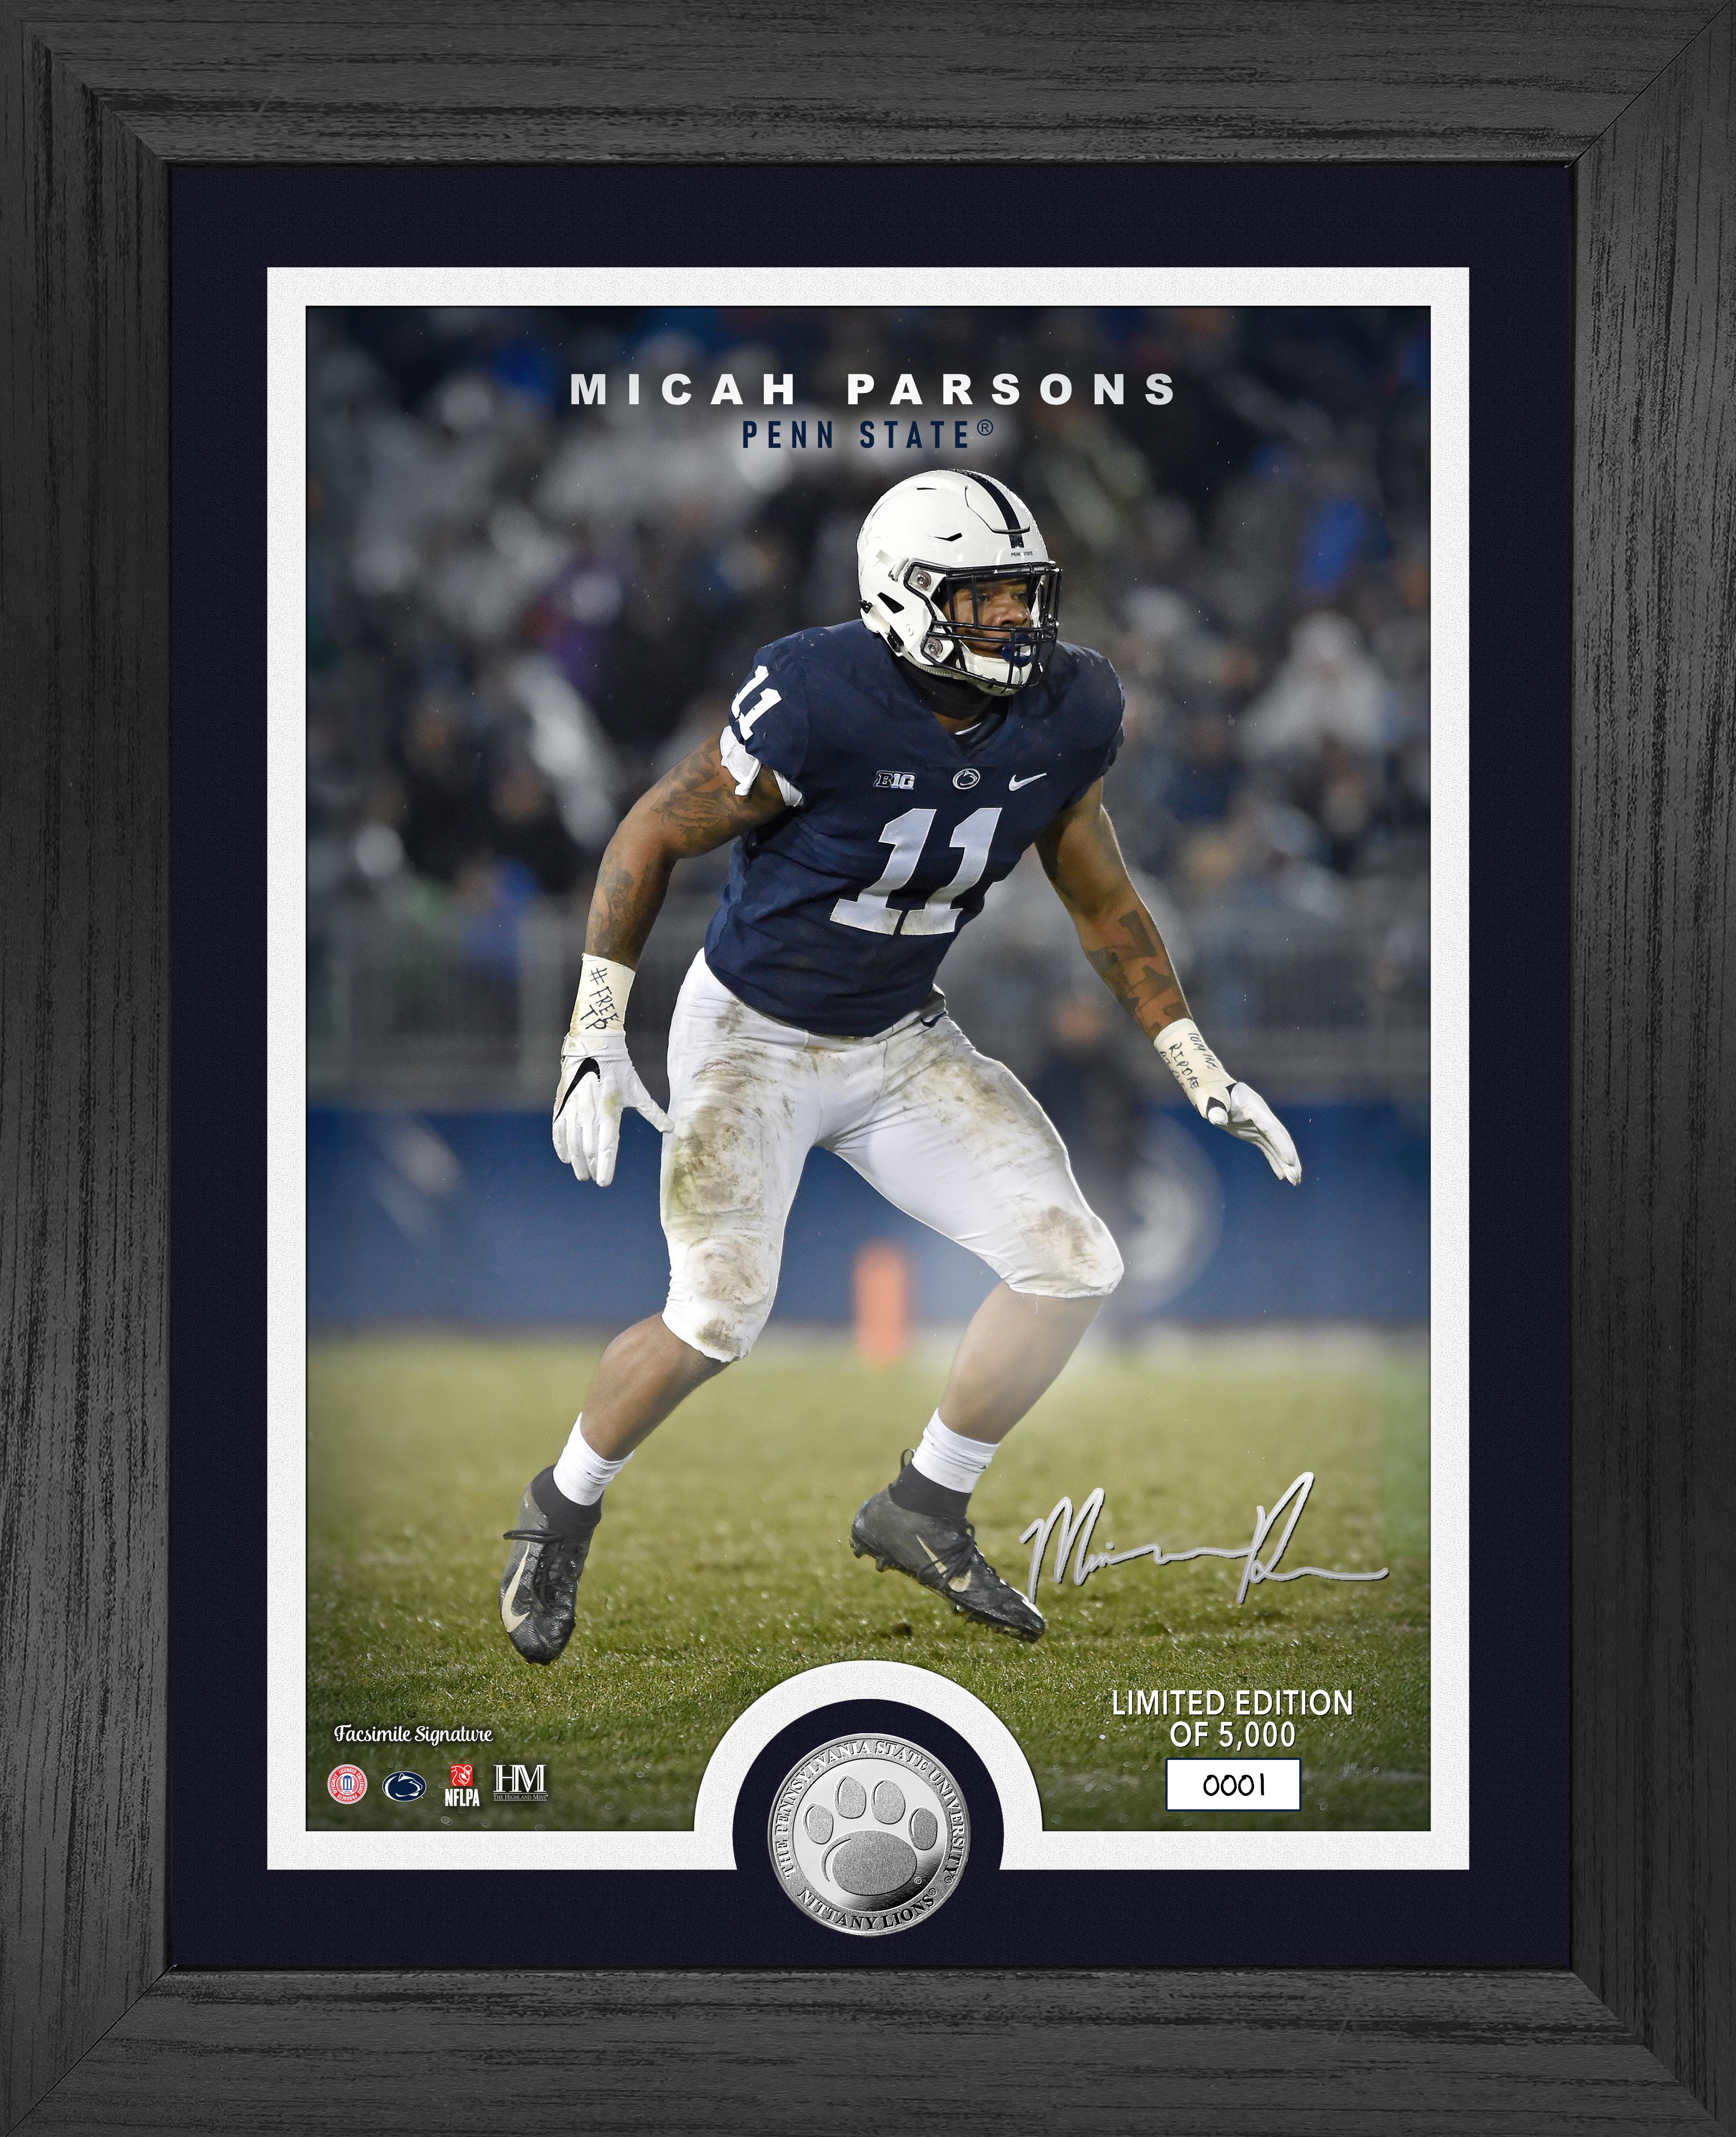 Micah Parsons Penn State Nittany Lions Silver Coin Photo Mint